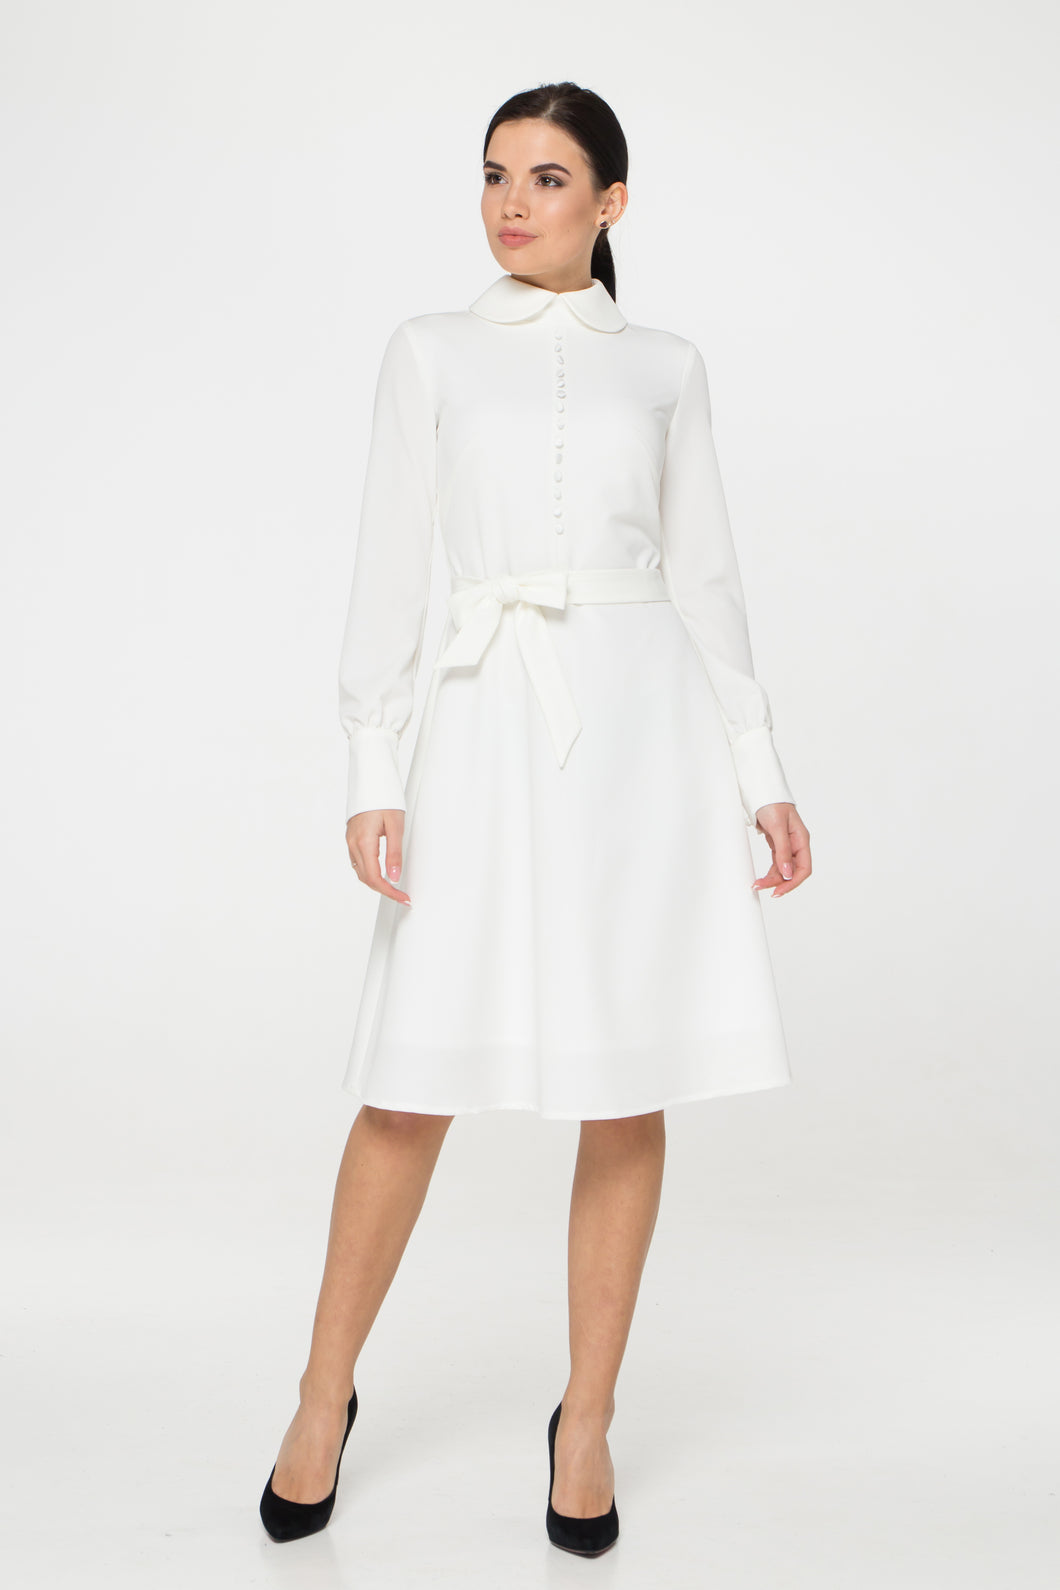 Collared Button front white dress